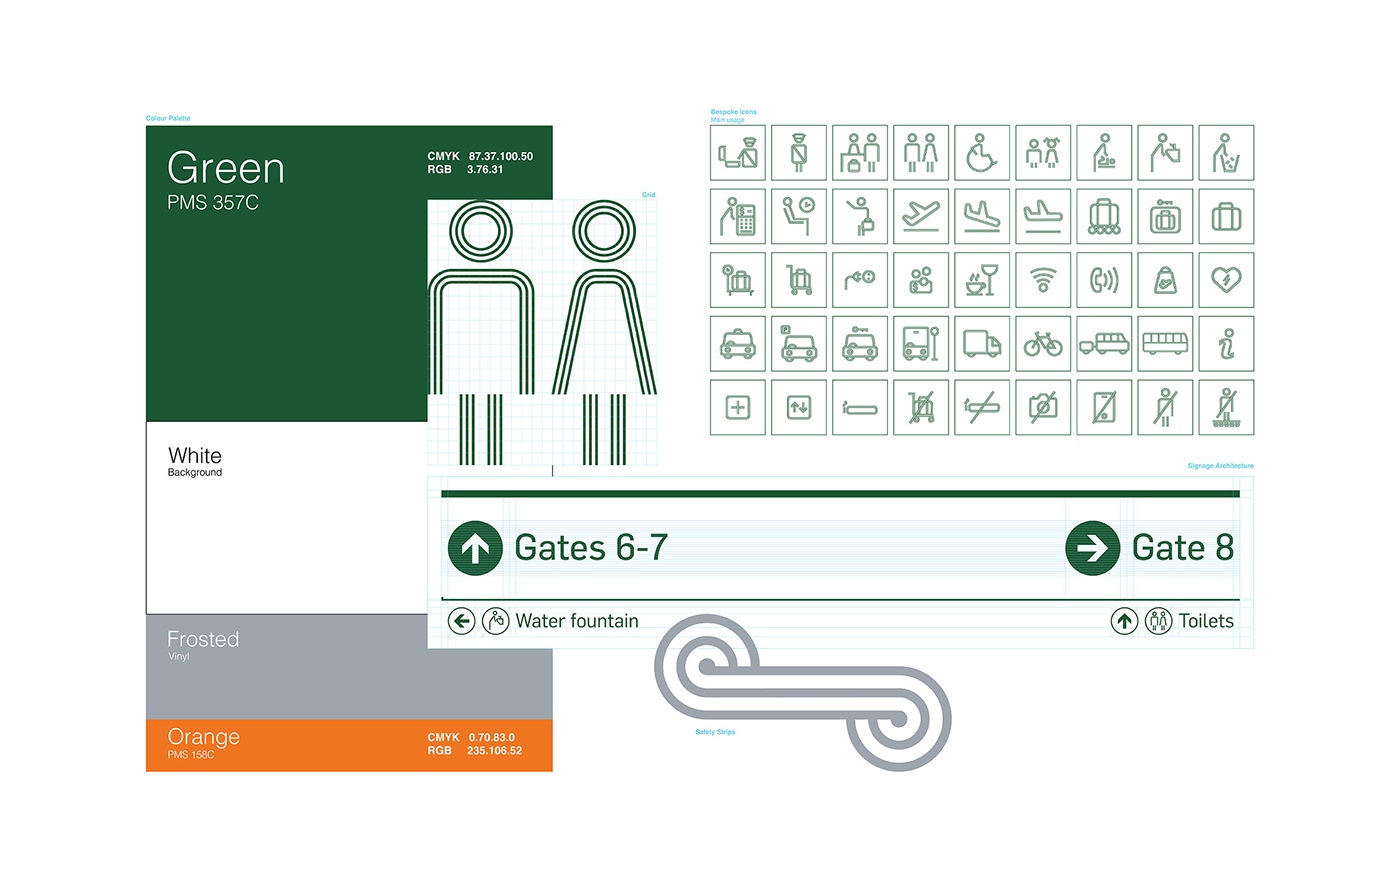 wayfinding airport New Zealand queenstown pictograms icon set signage system concept development Space design visual identity